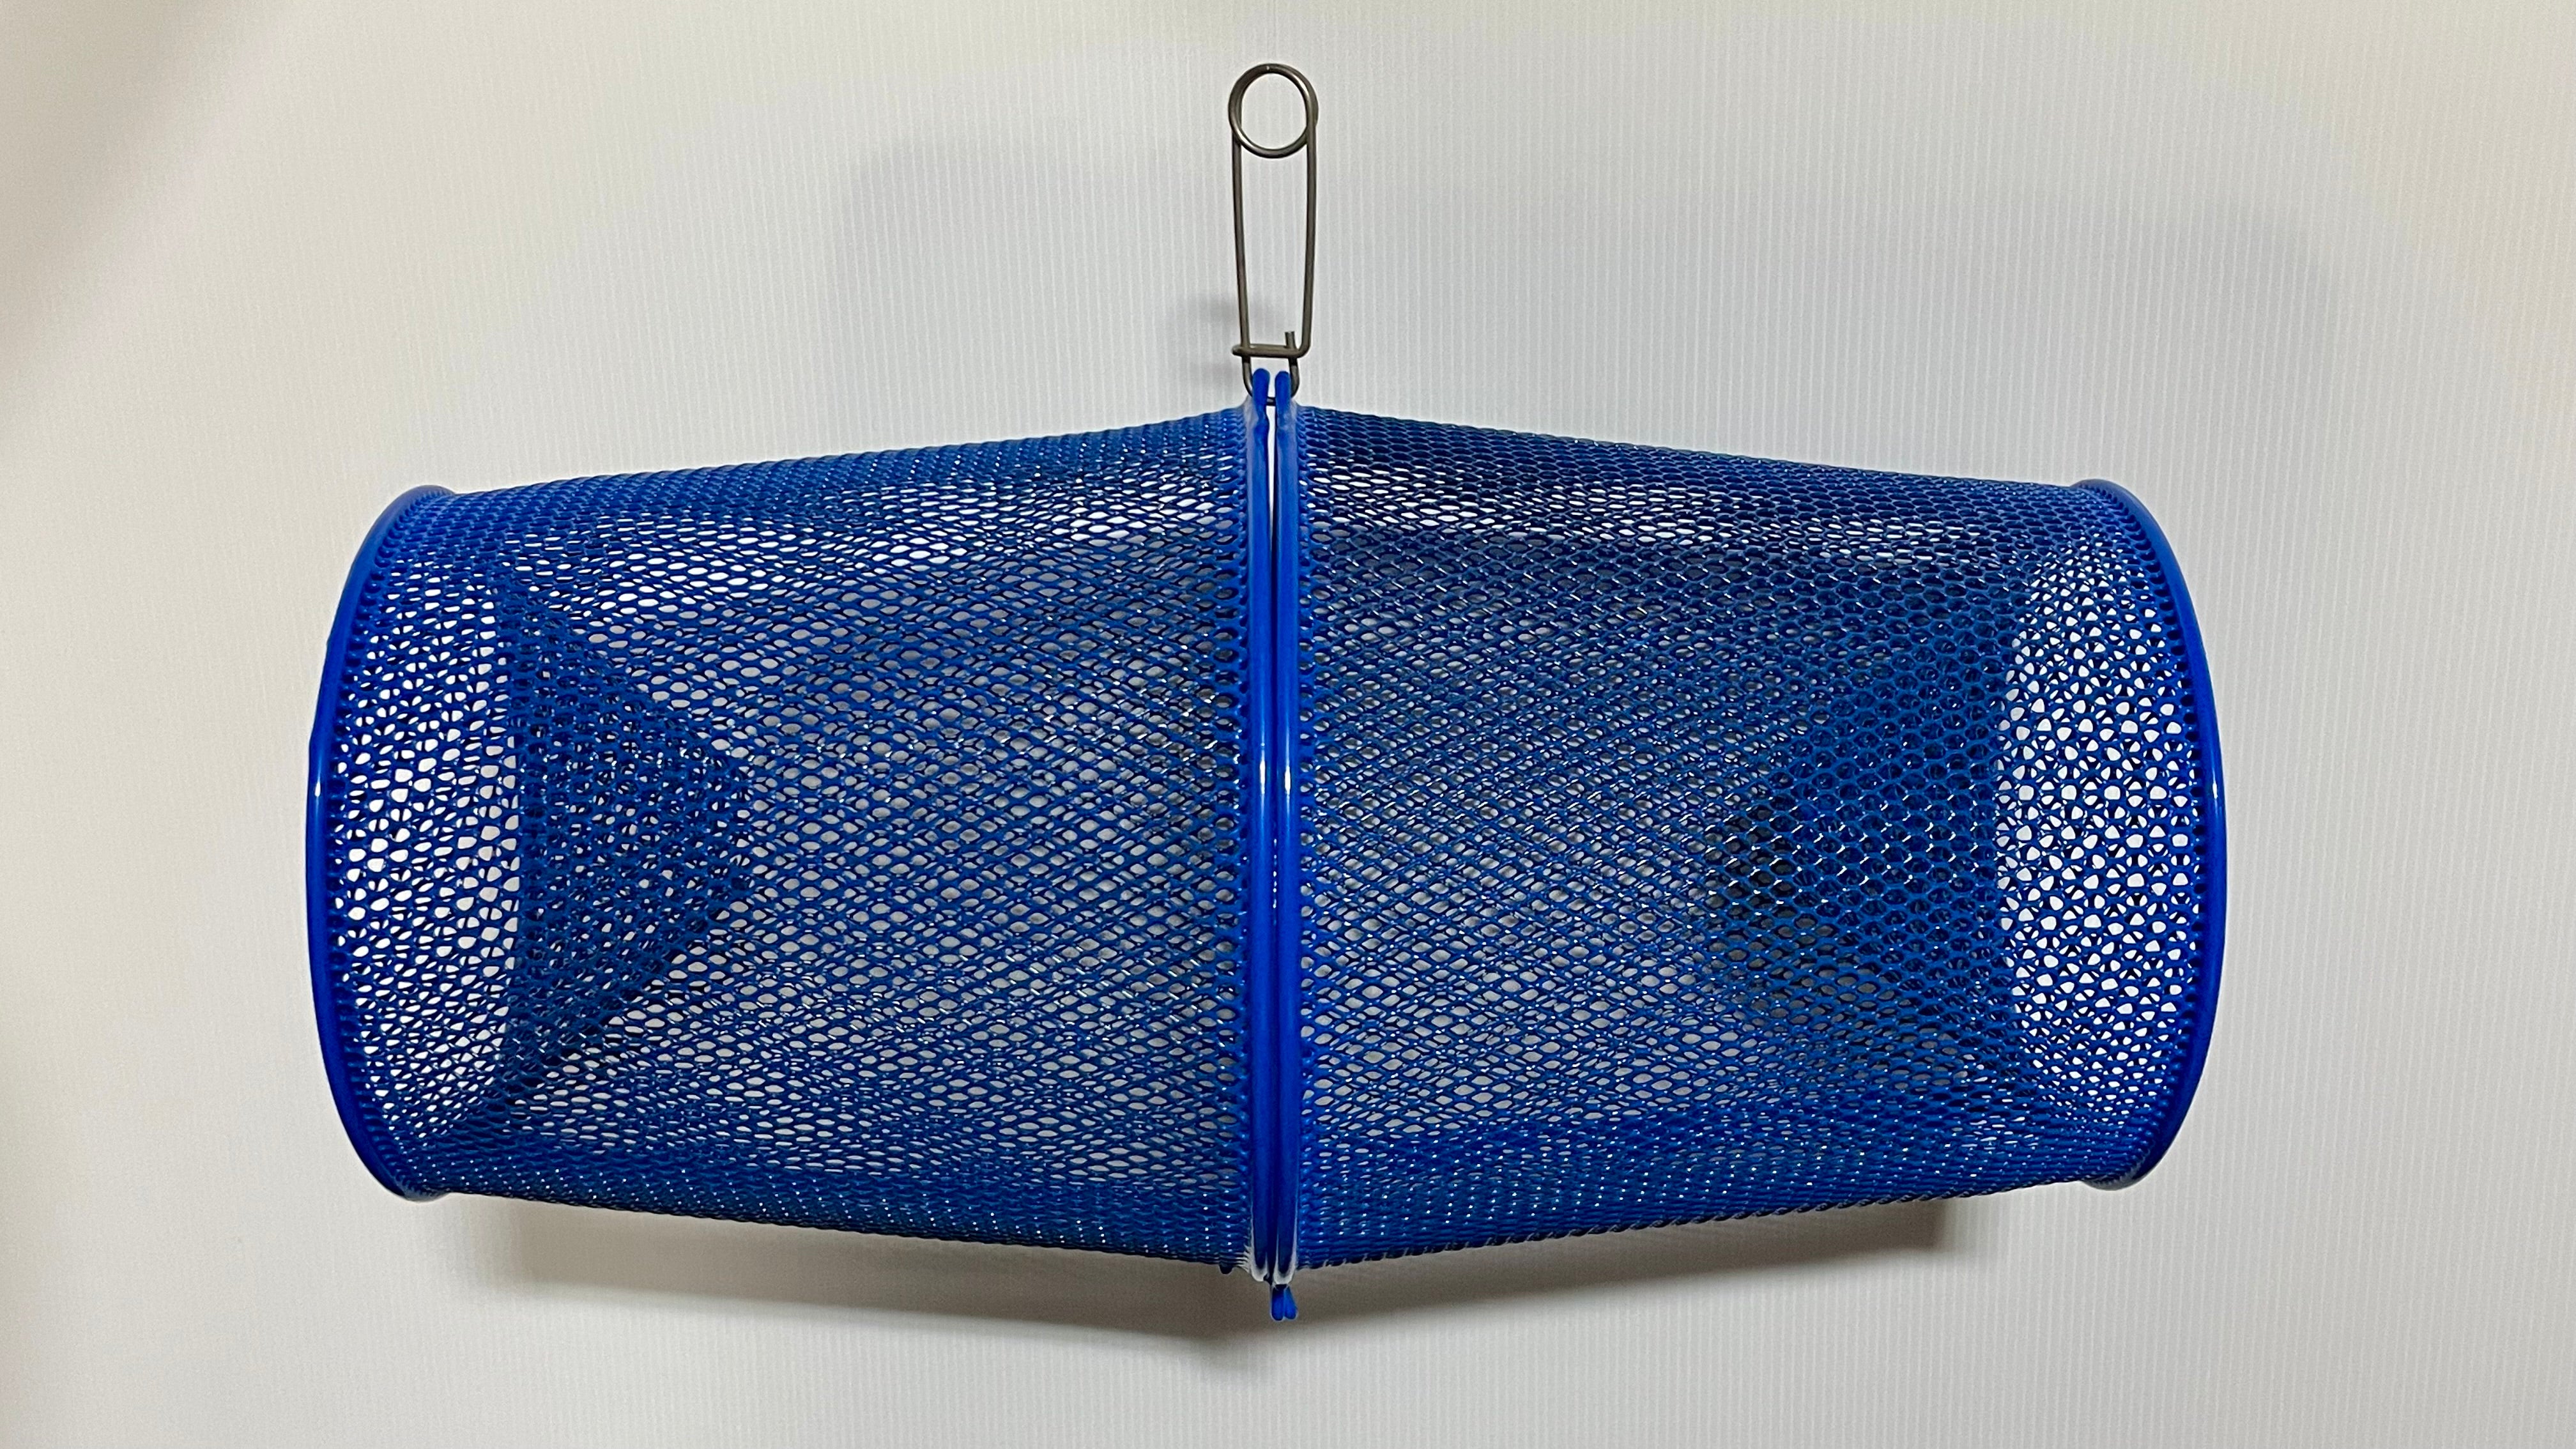 Minnow, Crawfish Trap 3/8 Mesh, Blue Coated, Heavy Duty Metal, 16.5 Long, Catch All Minnow for Bait.